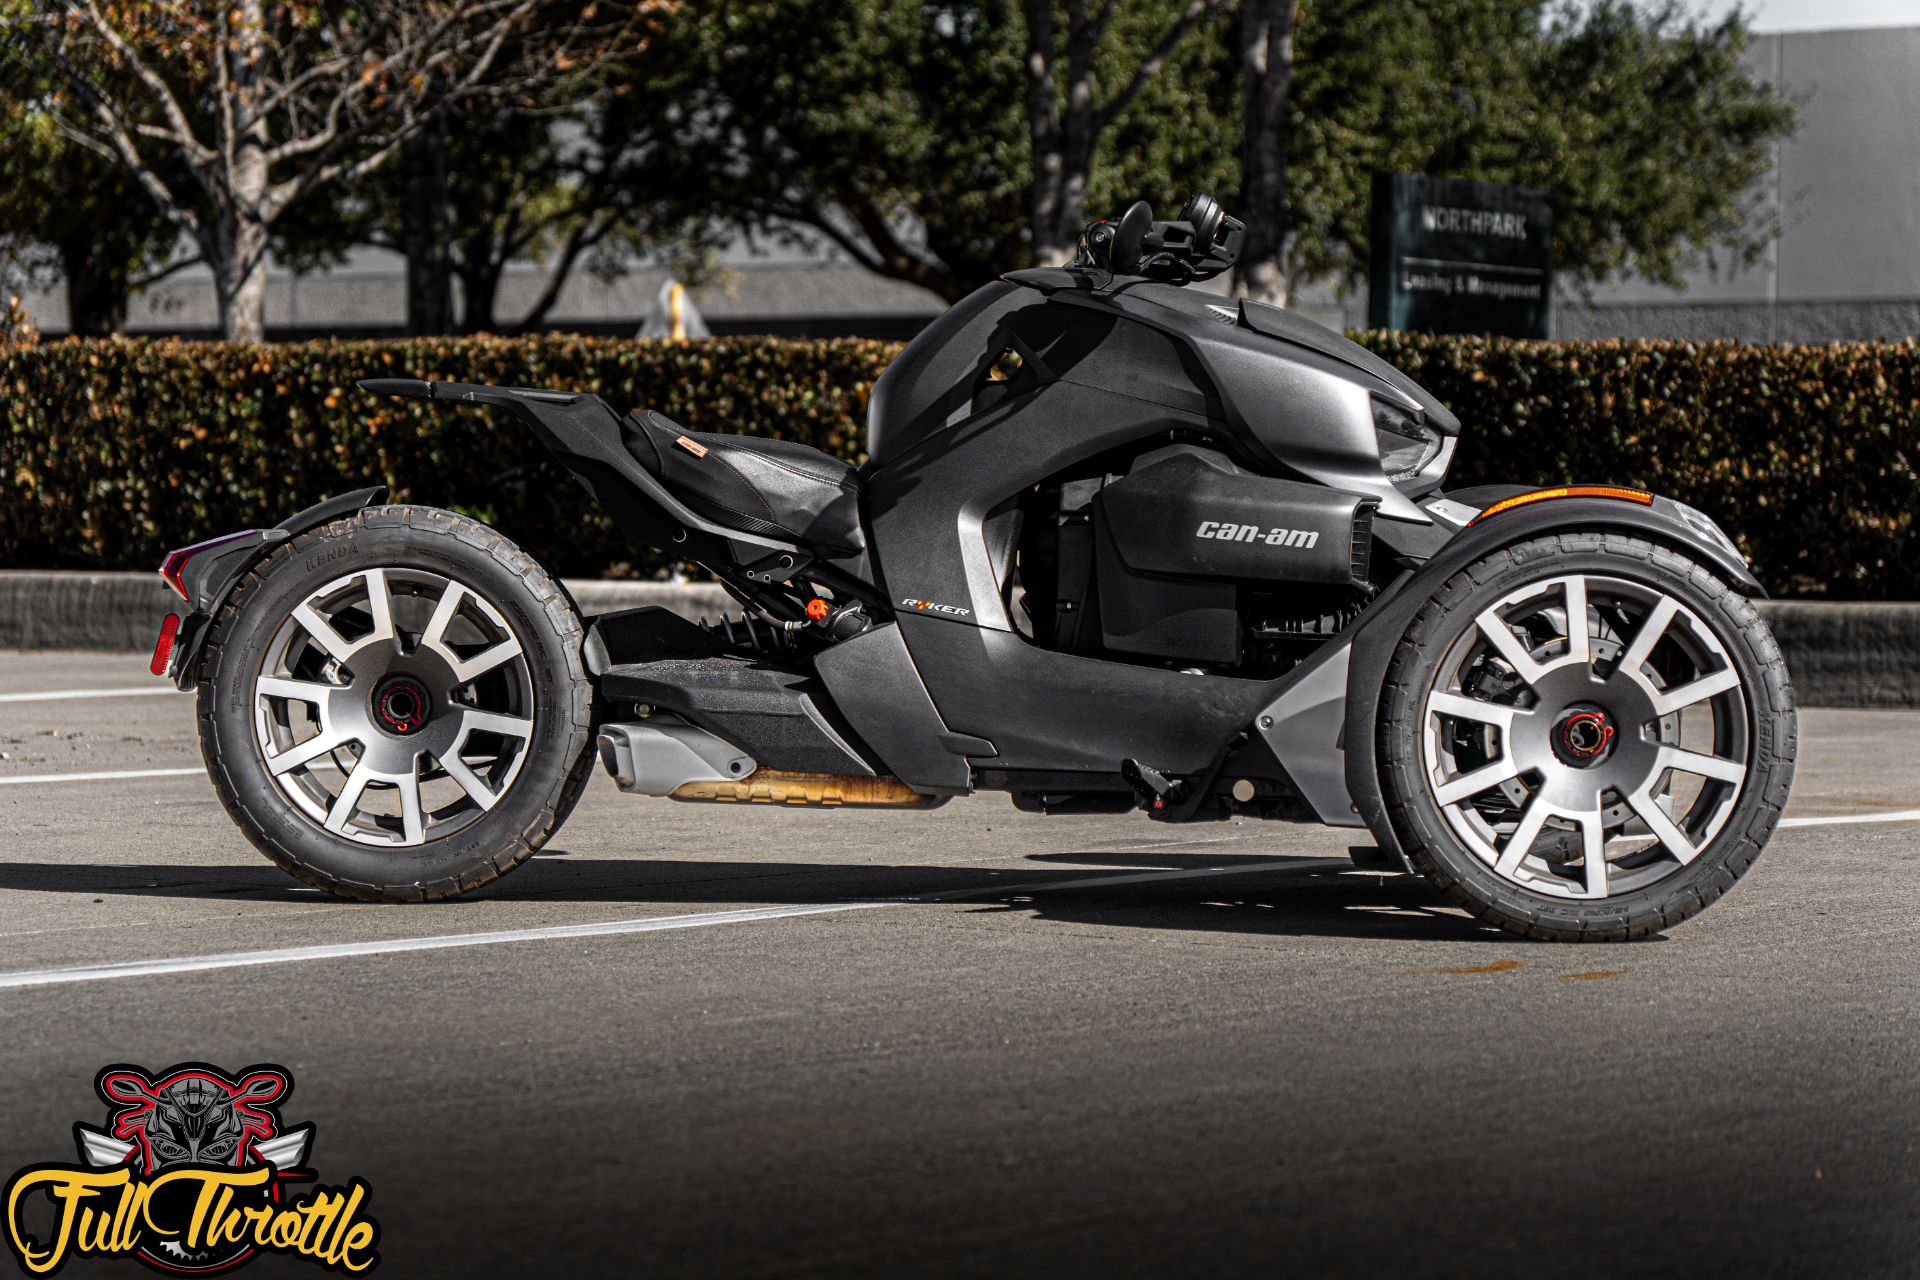 2021 Can-Am Ryker Rally Edition in Houston, Texas - Photo 2